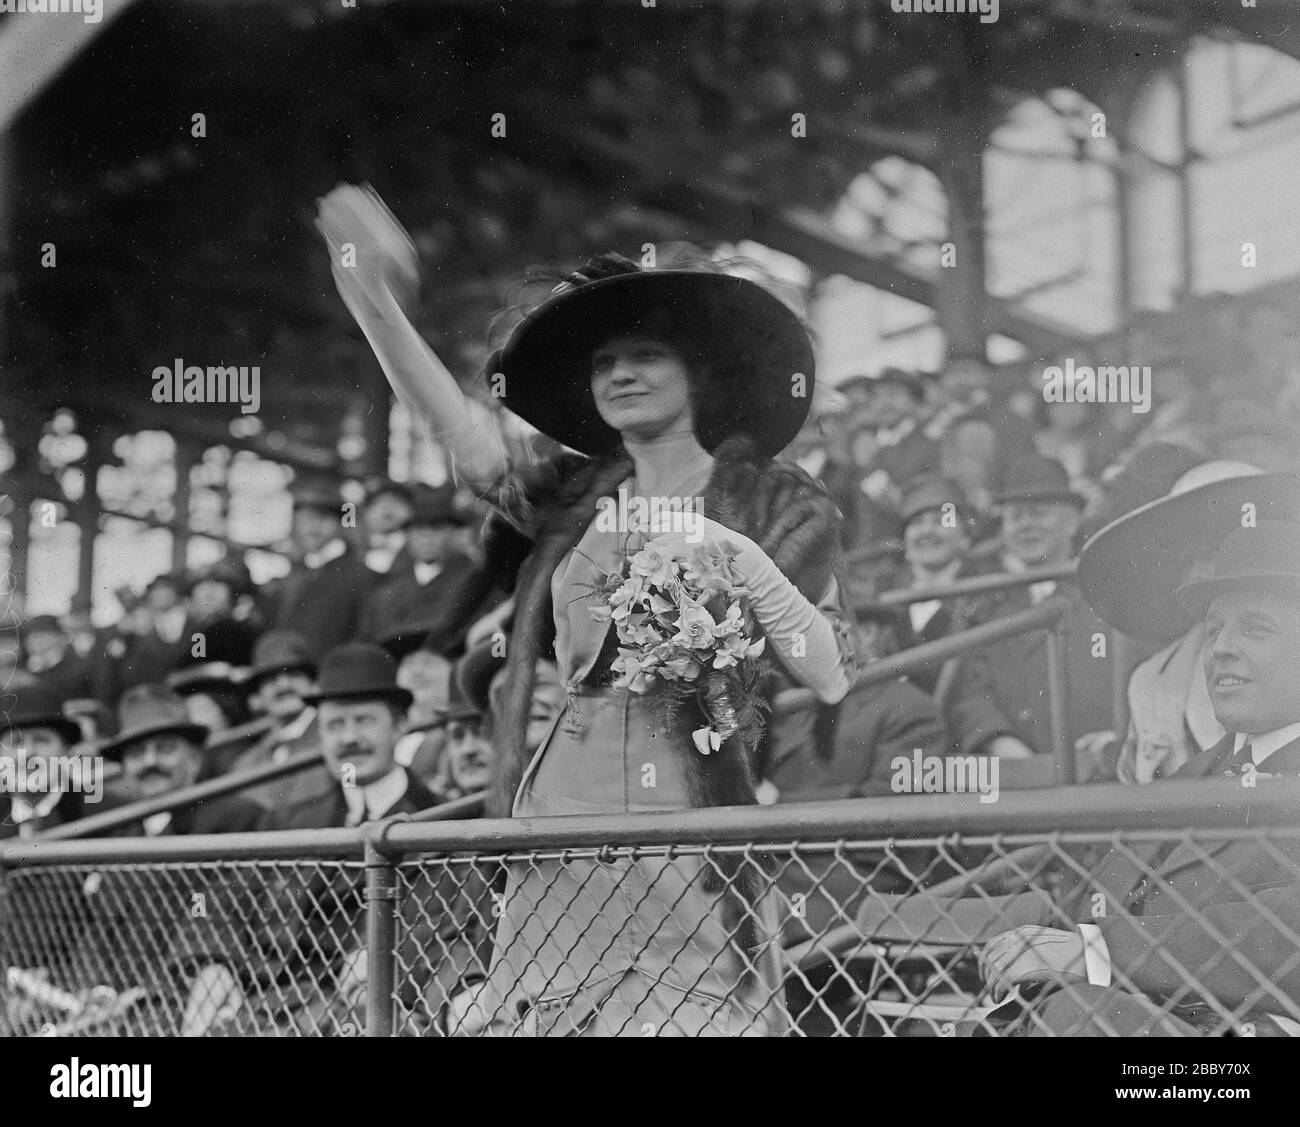 Miss Genevieve Ebbets, youngest daughter of Charley Ebbets, throws first ball at opening of Ebbets Field ca. 1913 Stock Photo